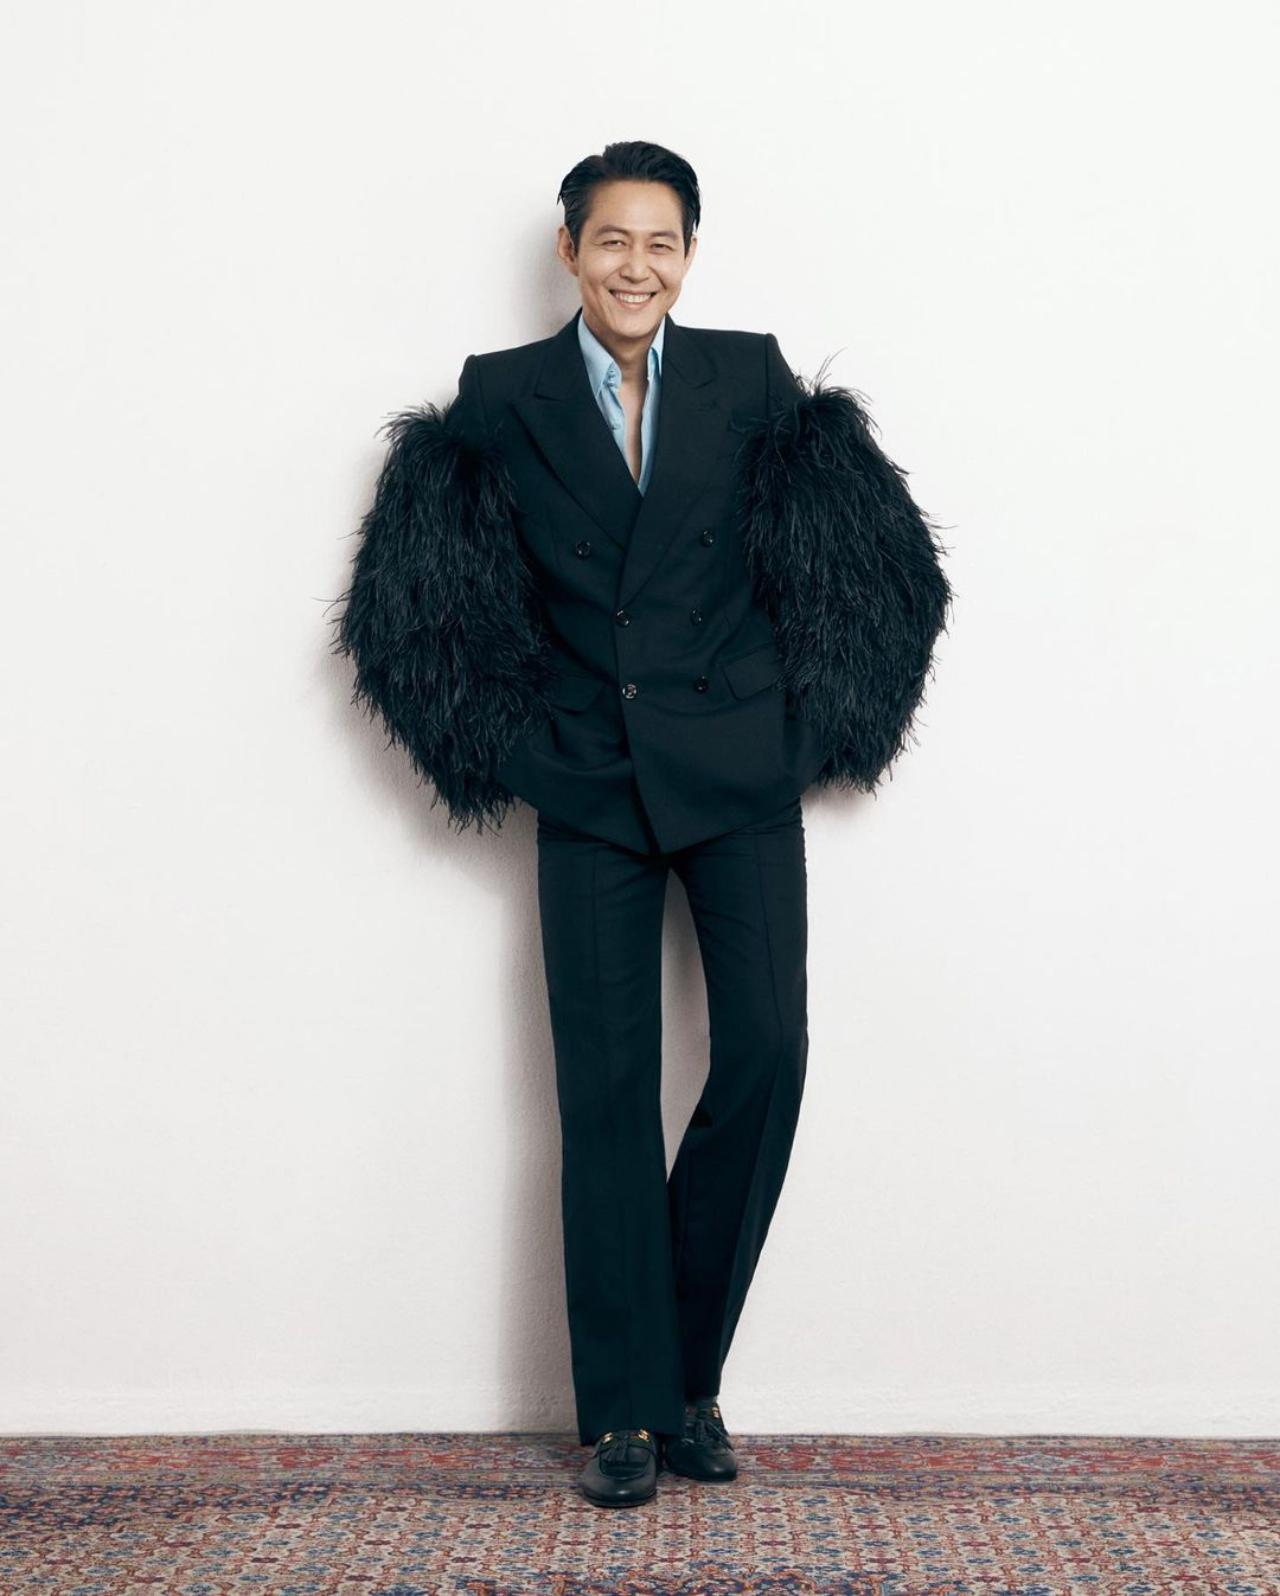 Lee Jung Jae for Gucci
For the second installment of its Gucci Valigeria campaign, legendary Italian fashion house Gucci tapped Lee Jung-jae as its star. The actors modelled several pieces from the collection, including outfits stepped in history, heritage. Some of them were even monogrammed!